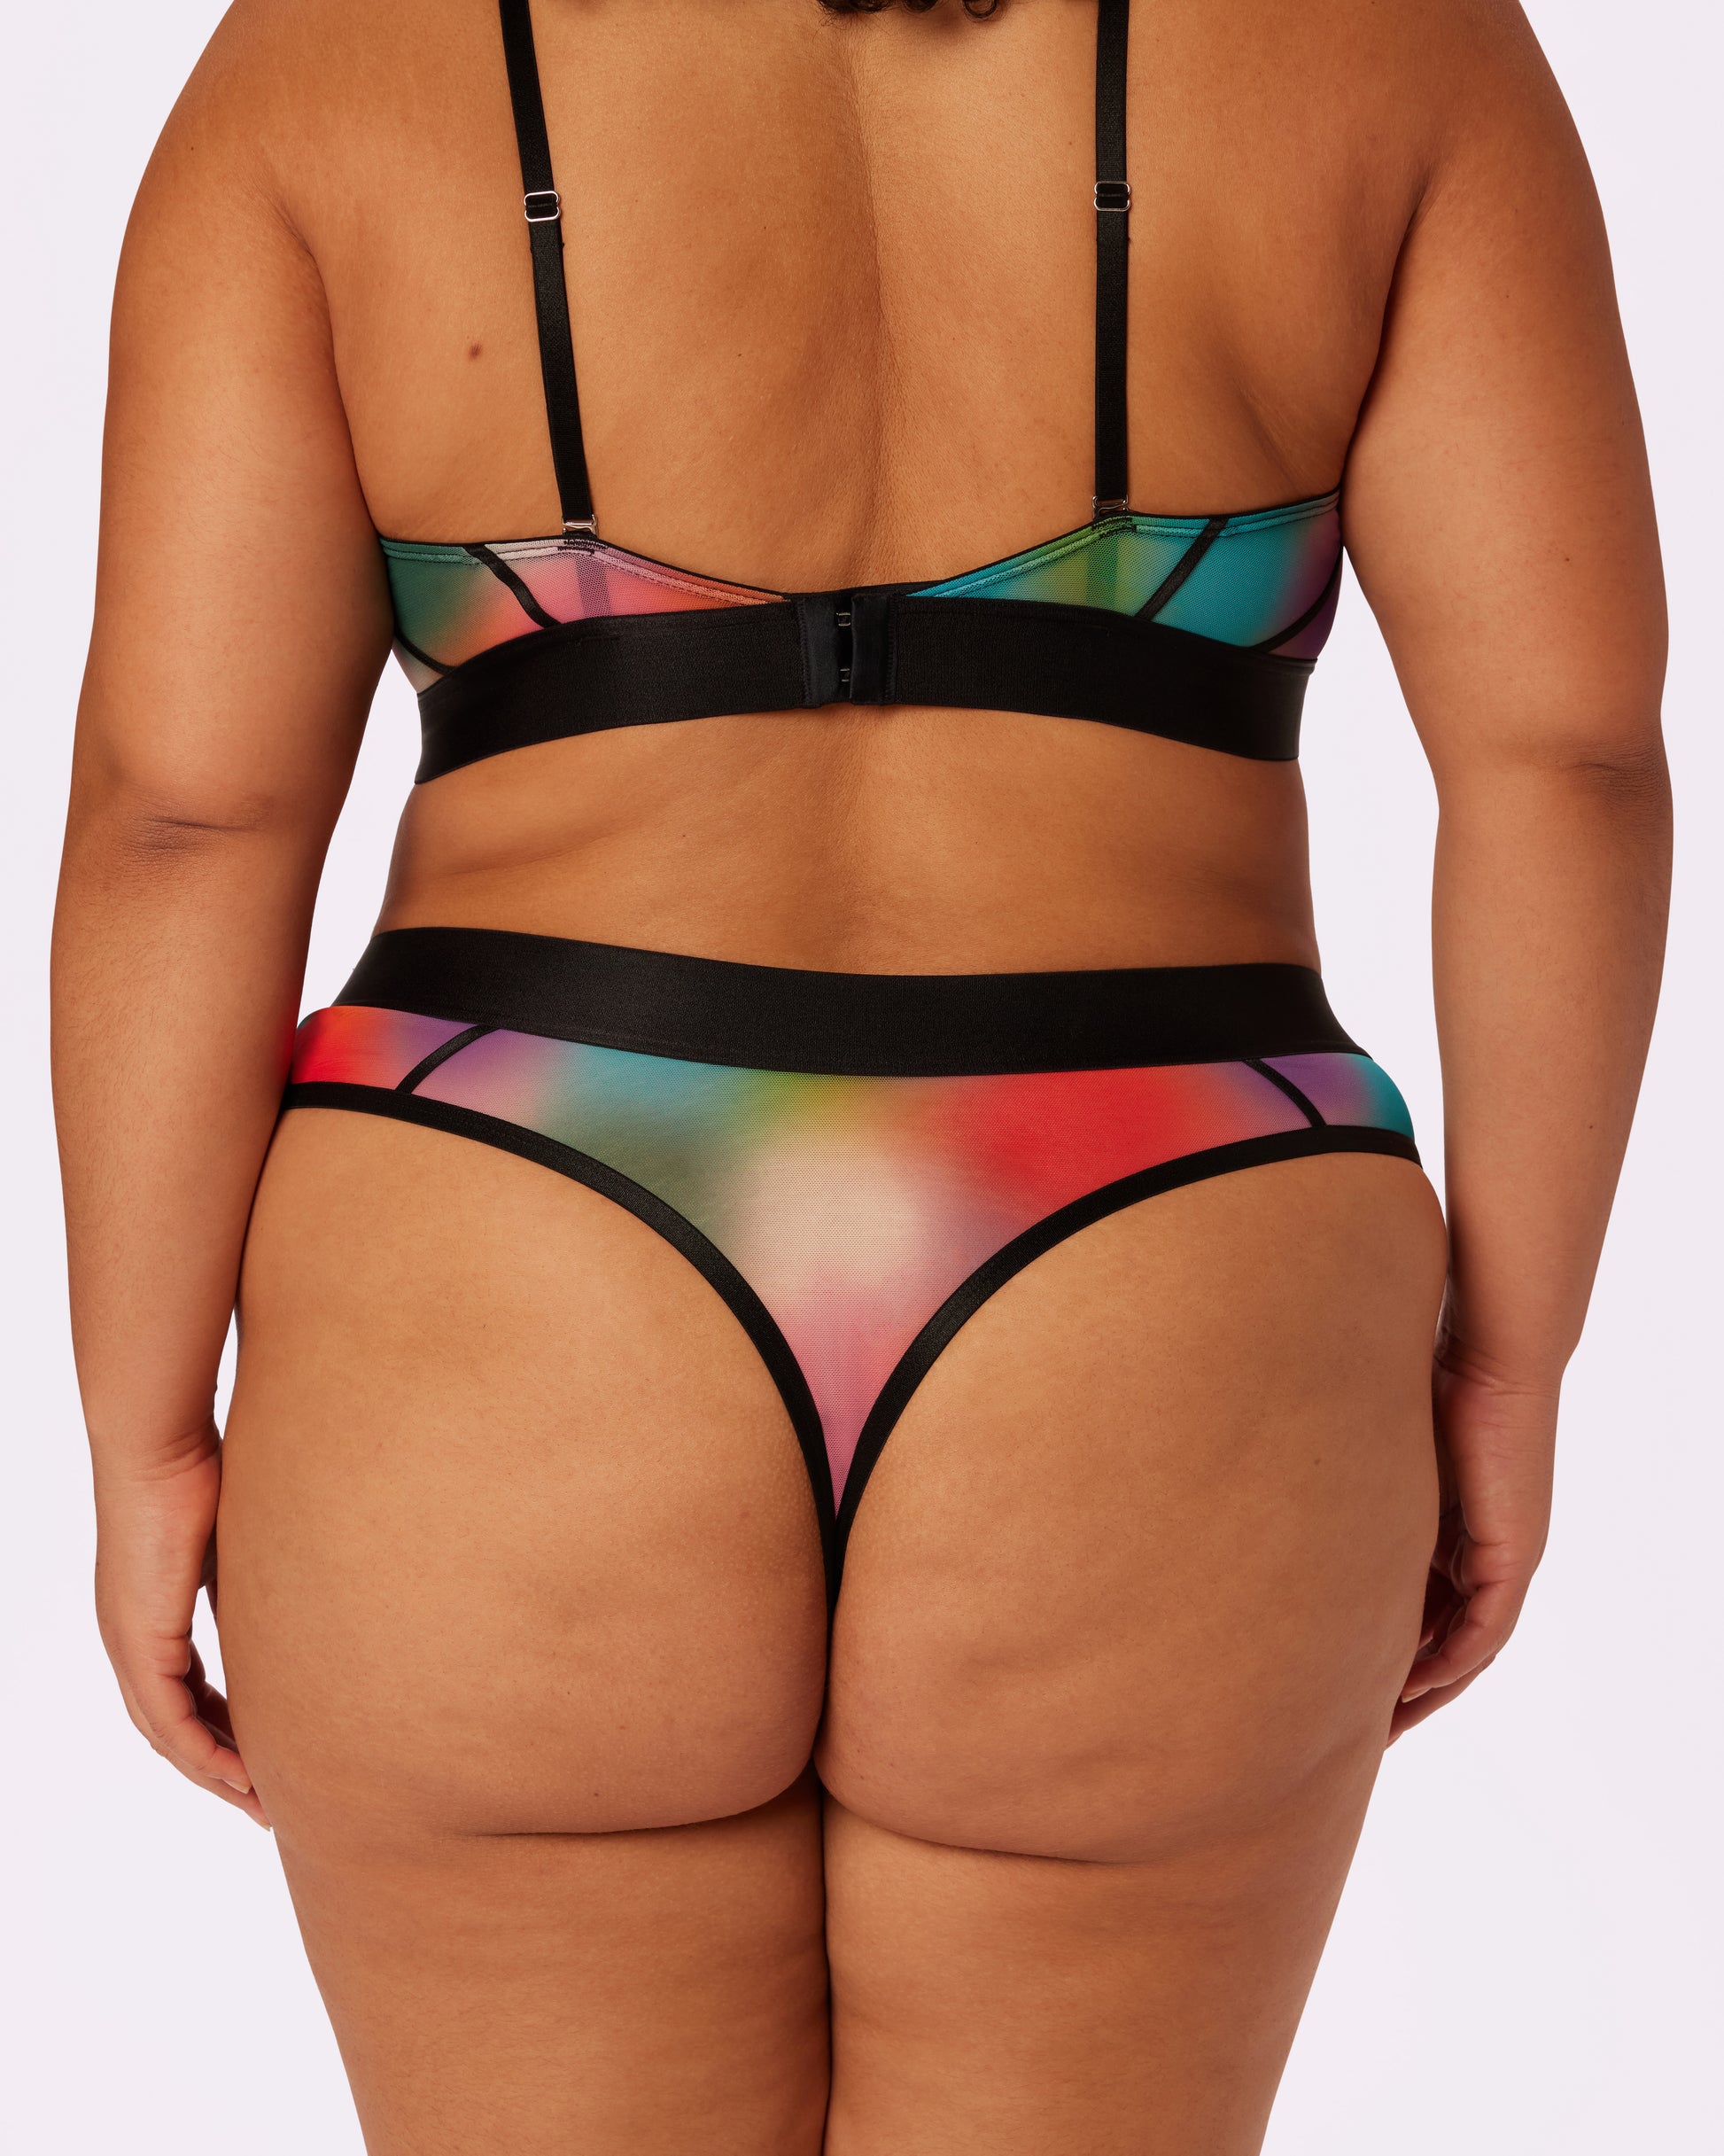 Plus Size Living In Color Rainbow Bodysuit, Sexy Colorful Lingerie